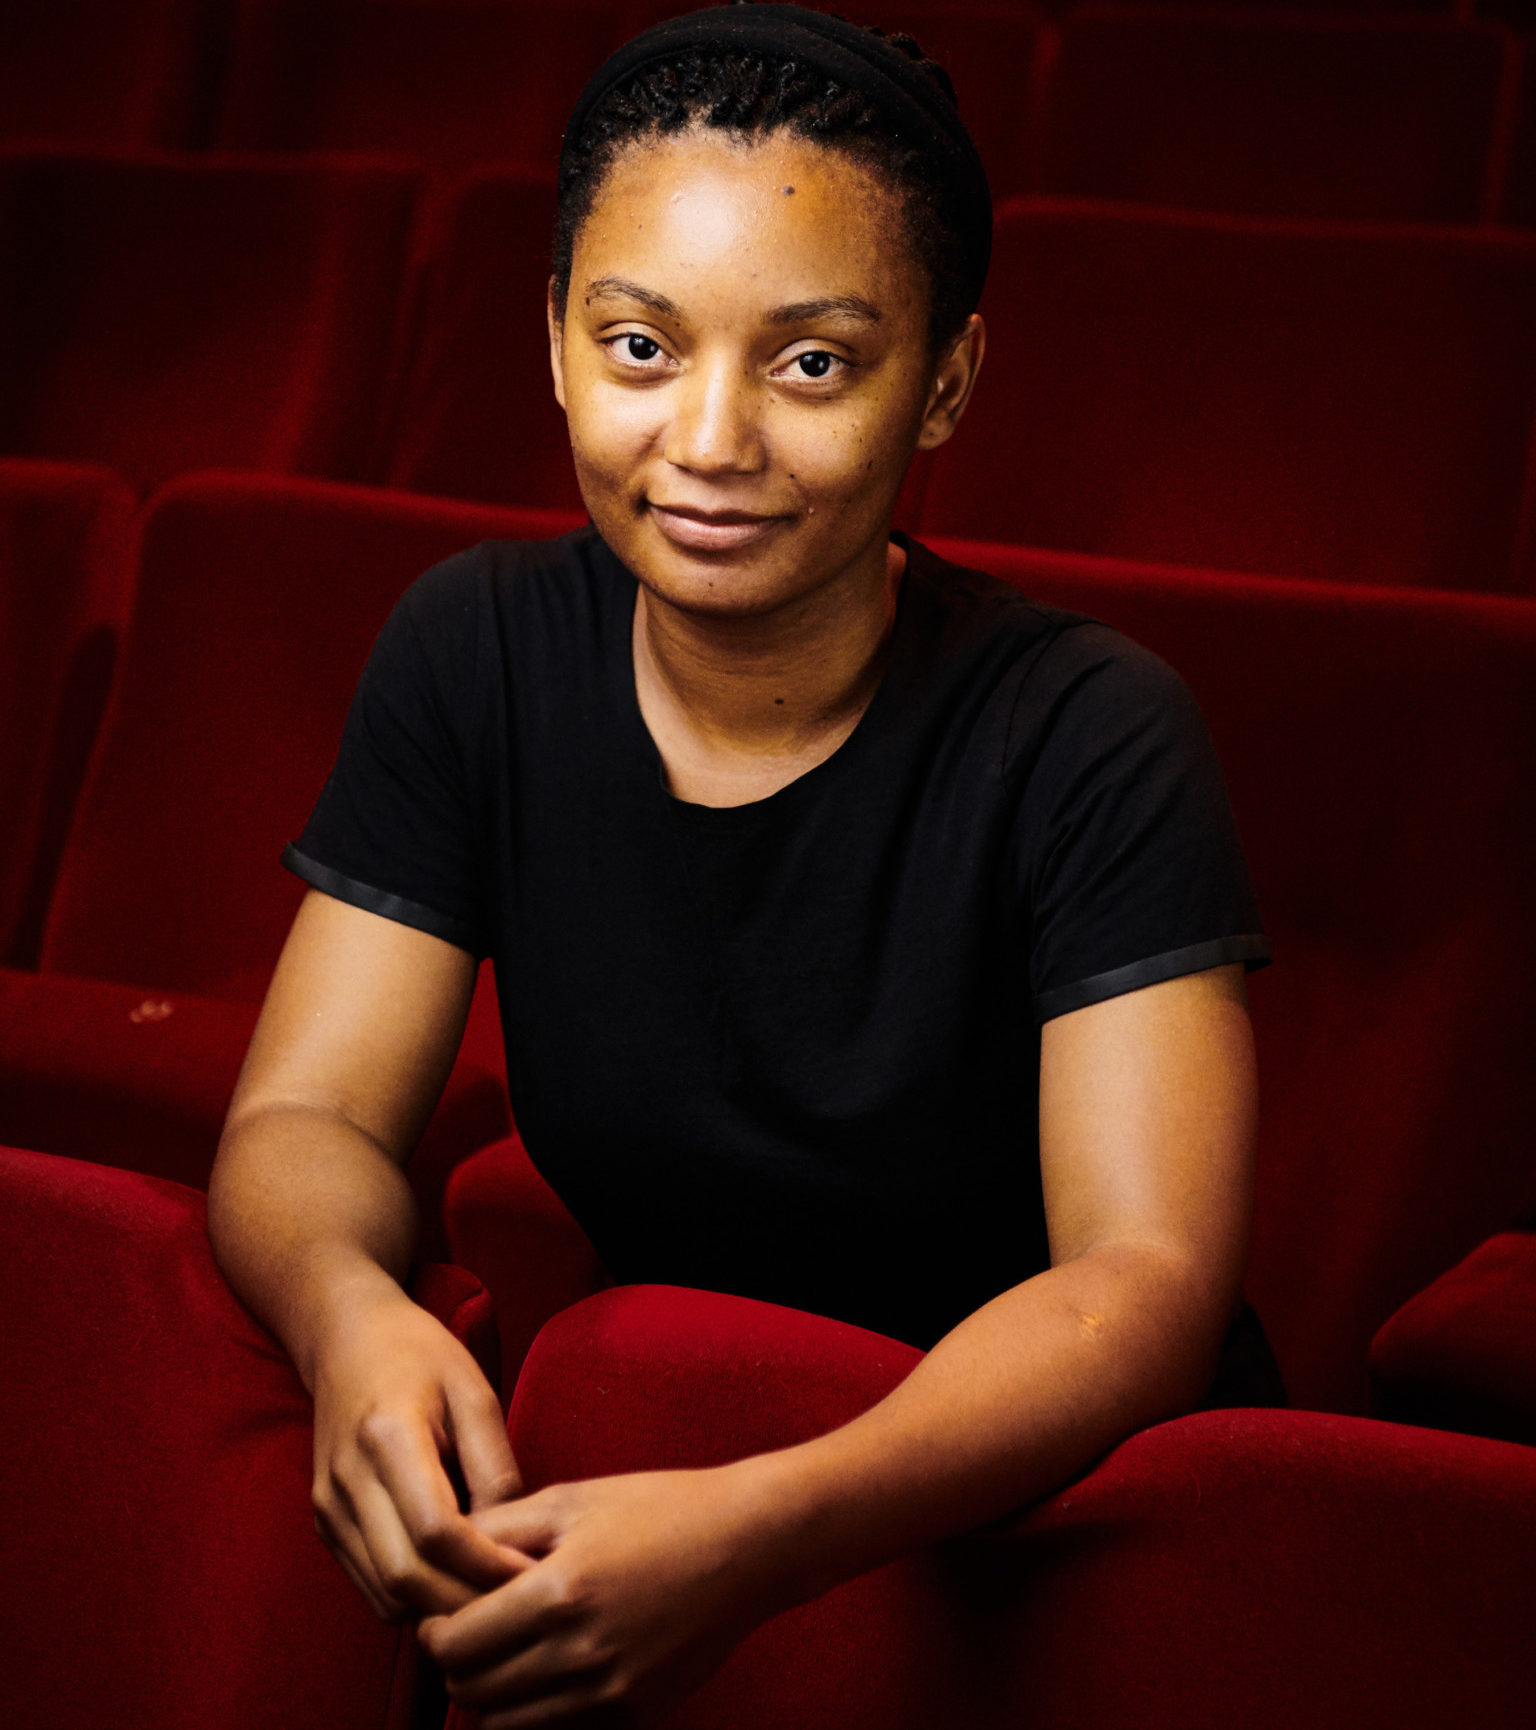 Rungano nyoni is a self-taught writer/director born in lusaka, zambia and grew up in wales, uk. Her short films have featured in over 400 film festivals. In 2009 she won a bafta cymru for her short film “the list”. Her subsequent film “mwansa the great” was funded by uk film council and focus features (usa). It was selected at over 100 inter- national film festivals, awarded over 20 prizes and nomi- nated for a bafta in 2012. In 2015 rungano was selected for the nordic factory, a finnish/danish co production where she co-directed “listen”. “listen” was nominated for a european film award 2015 and won the best short narrative prize at tribeca film festival. Rungano’s debut feature, “i am not a witch”, premiered this year at cannes film festival in the directors fortnight sidebar, and also screened at tiff ahead of its lff premiere.